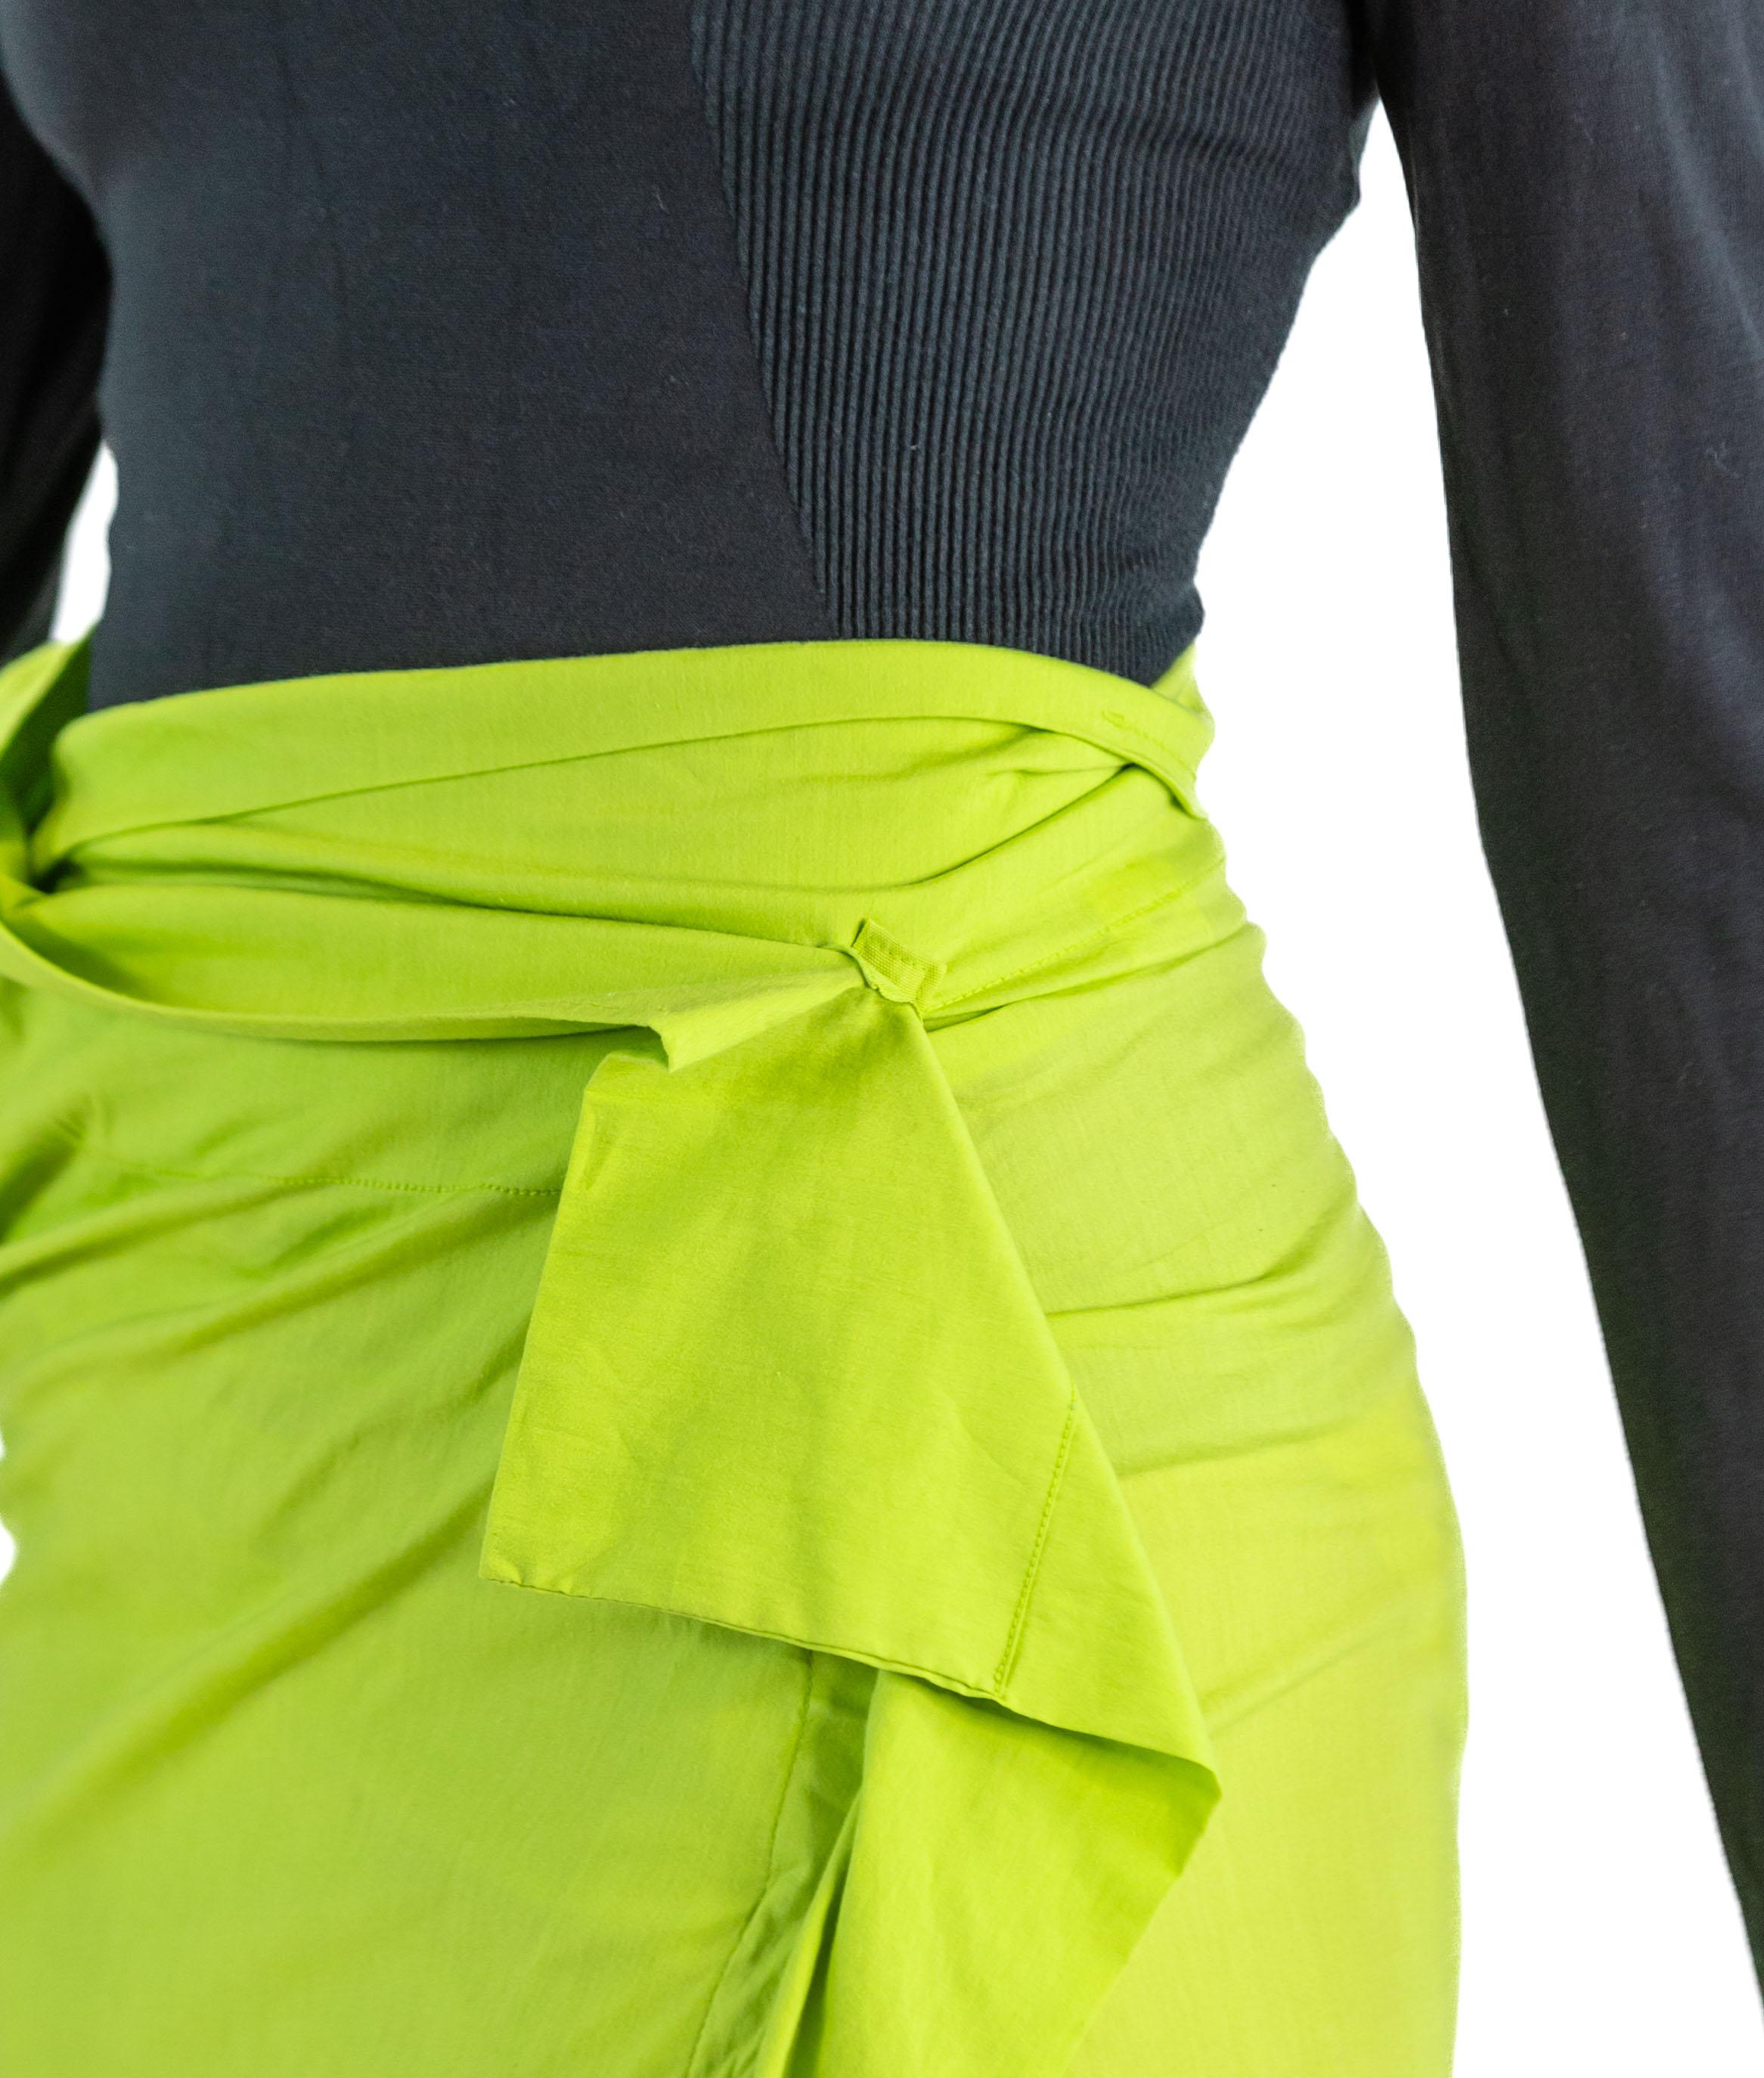 1990S ISSEY MIYAKE Lime Green & Black Rayon Blend Scoop Neck Top Skirt Ensemble For Sale 6